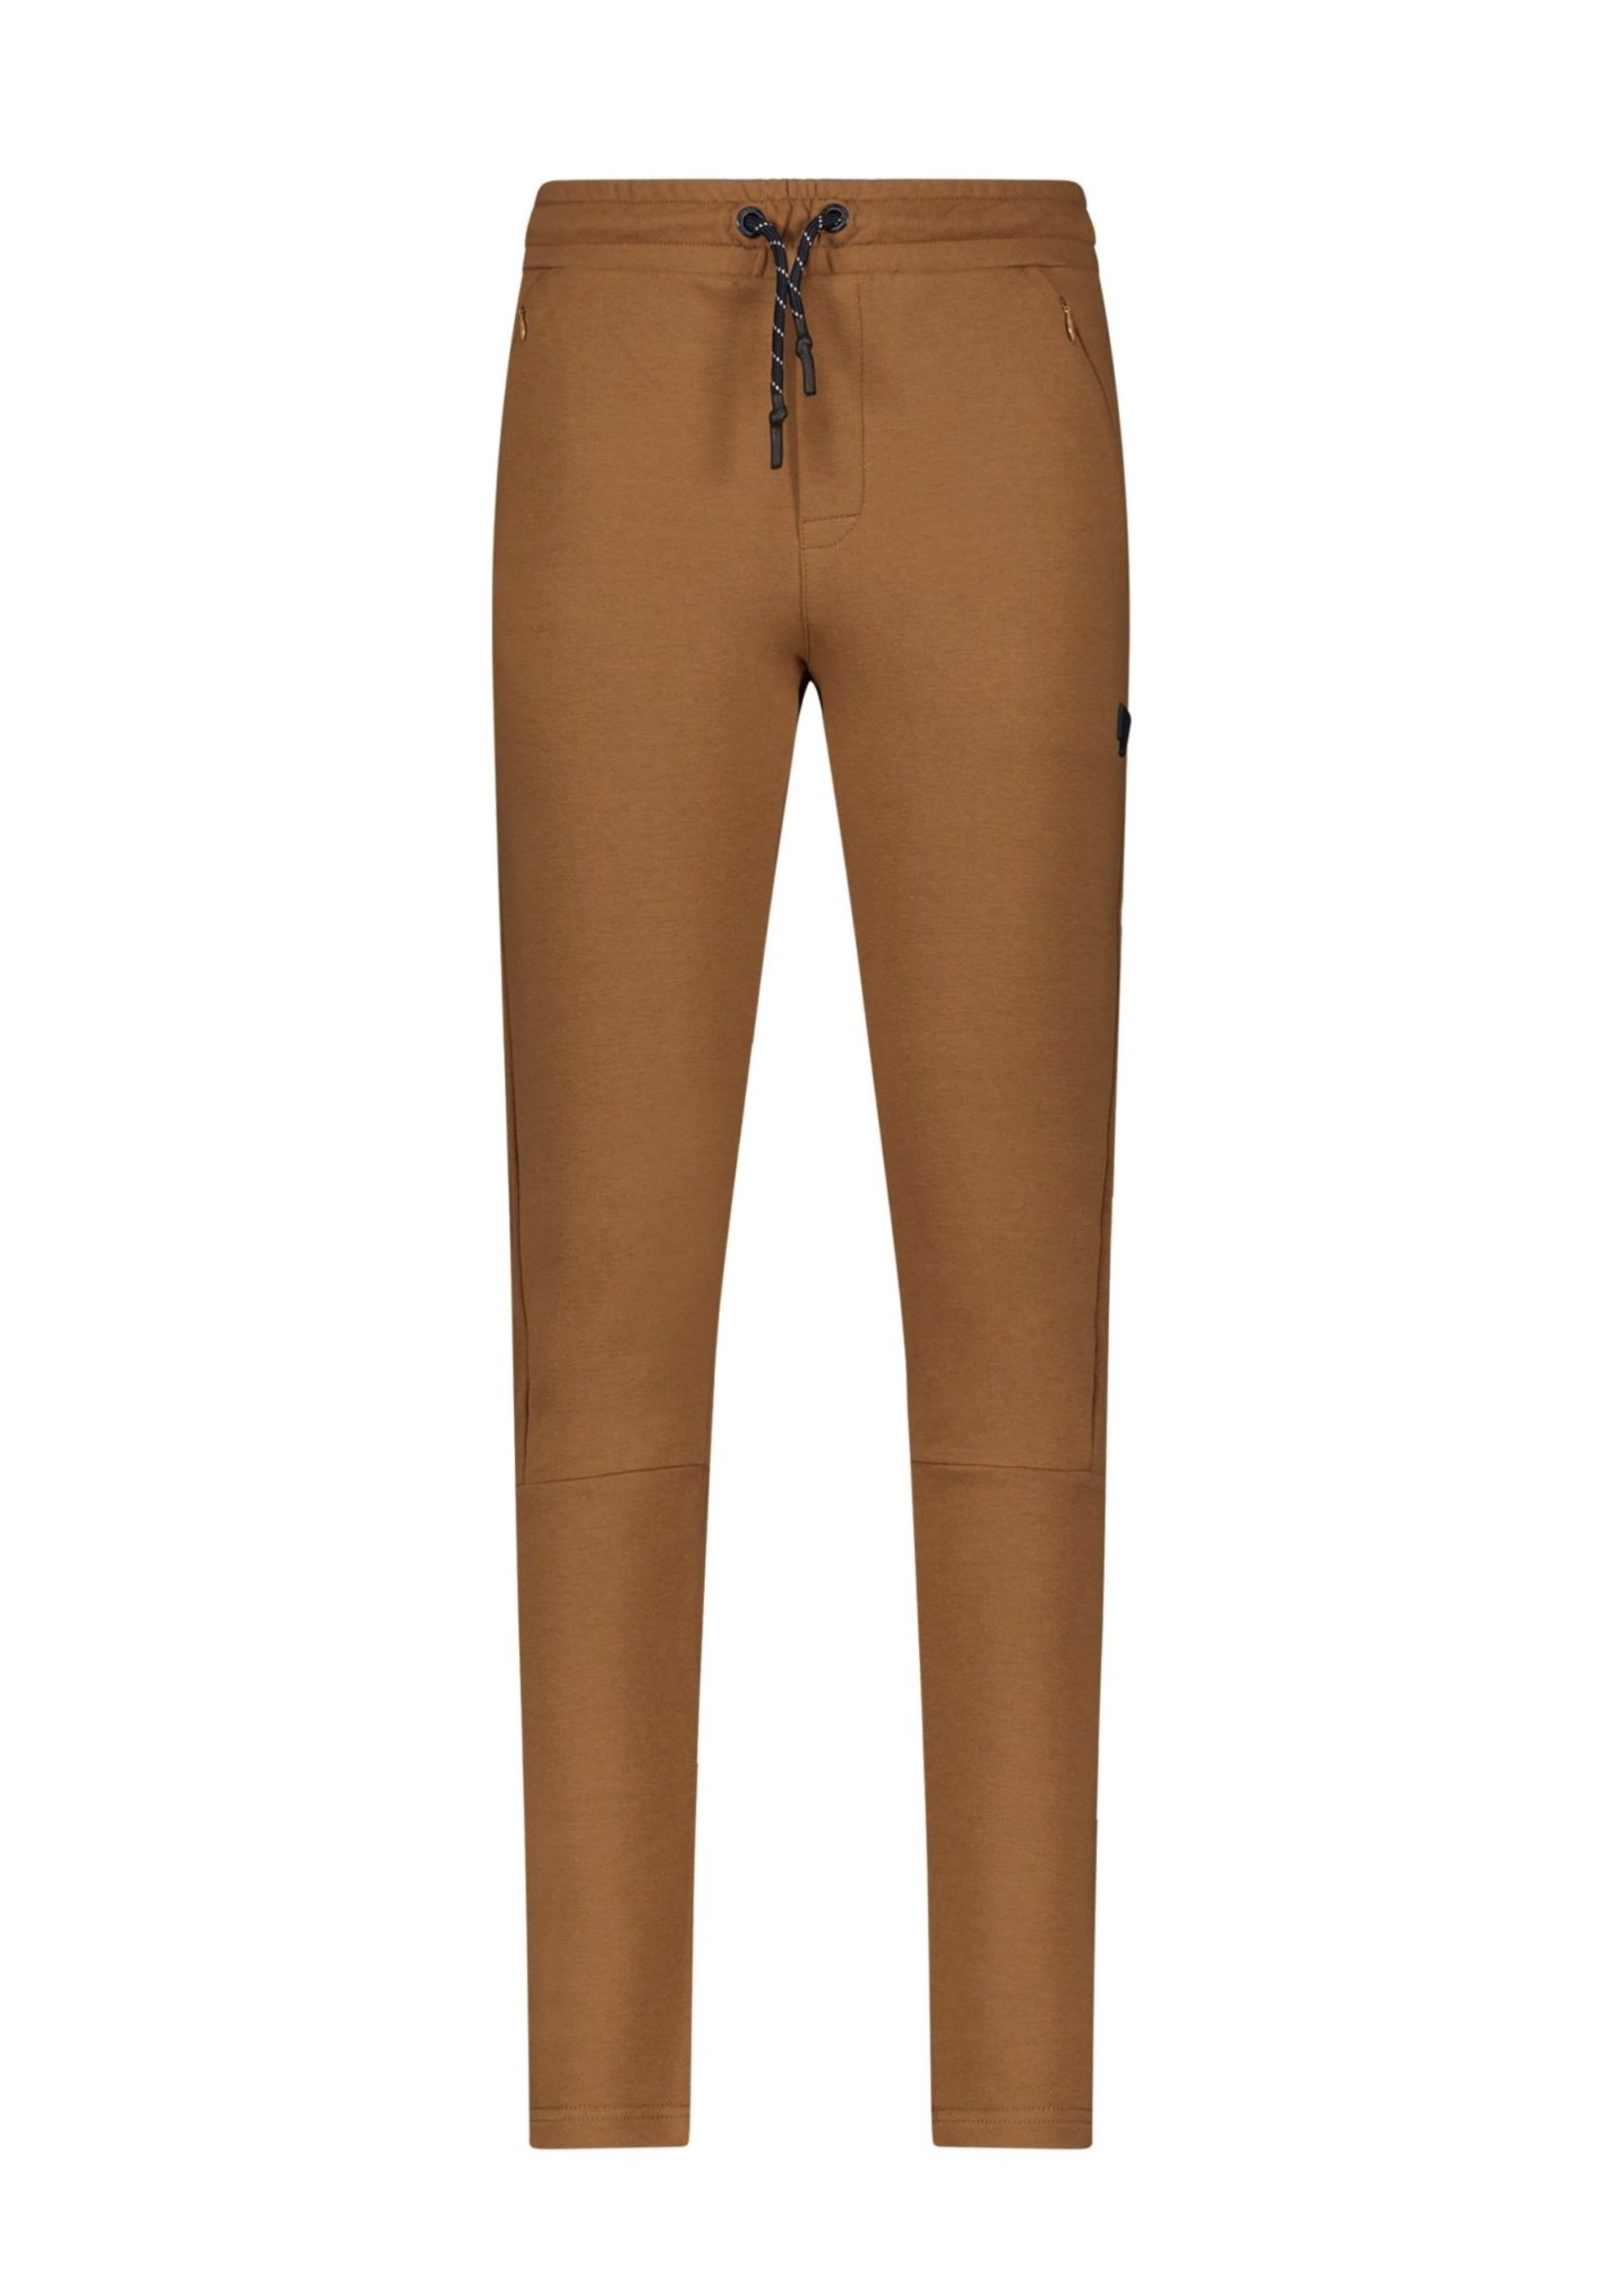 Bellaire BELLAIRE B208-4600 JOGG PANTS TOFFEE BROWN